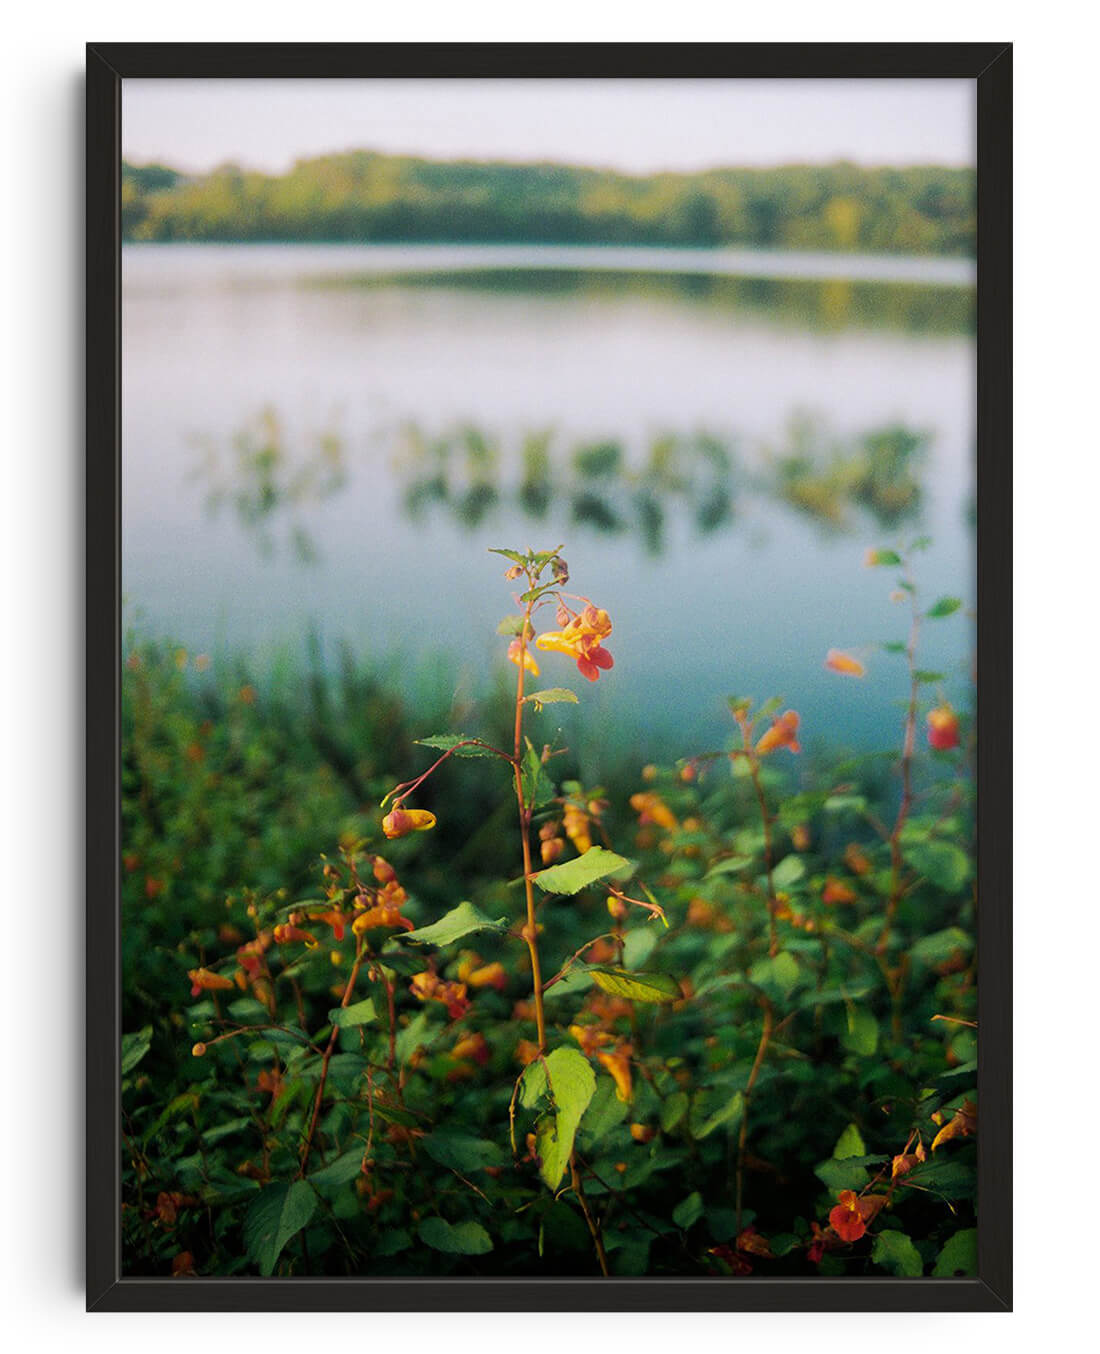 Lake Siloam by Kenzie Meeker contemporary wall art print from DROOL